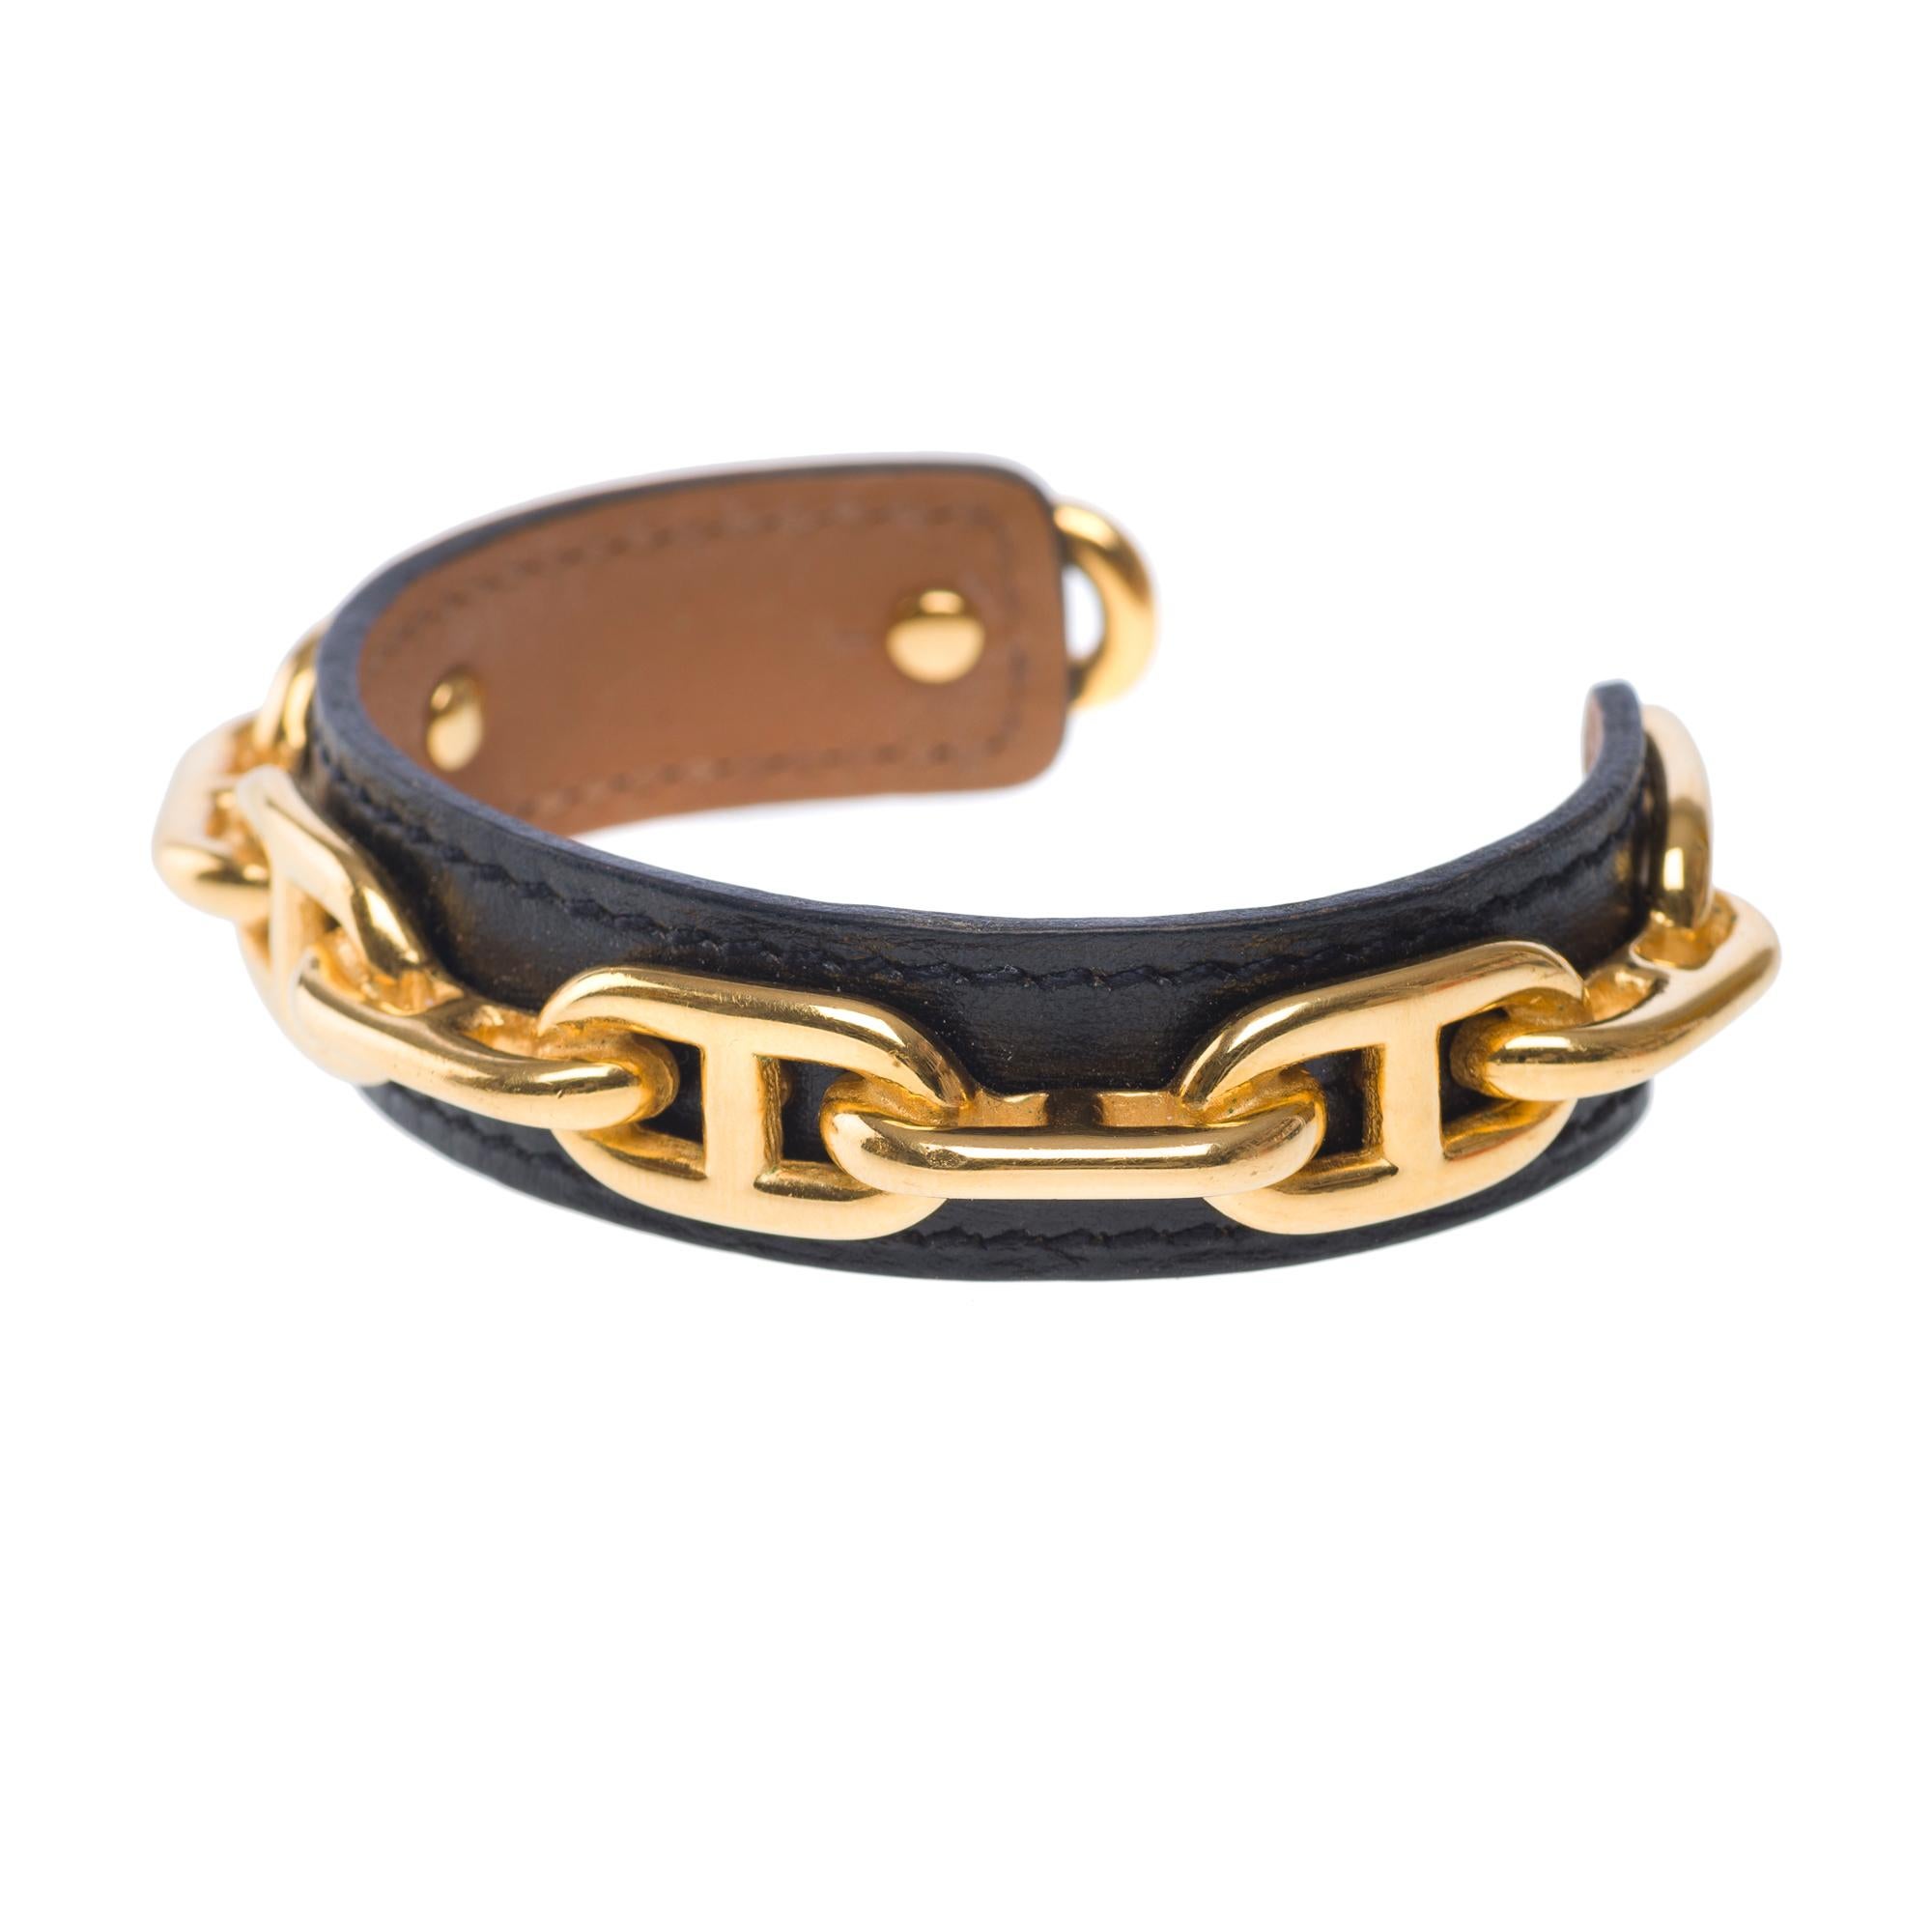 Very Chic Hermès Chaine D'Ancre bracelet in black leather, GHW 1